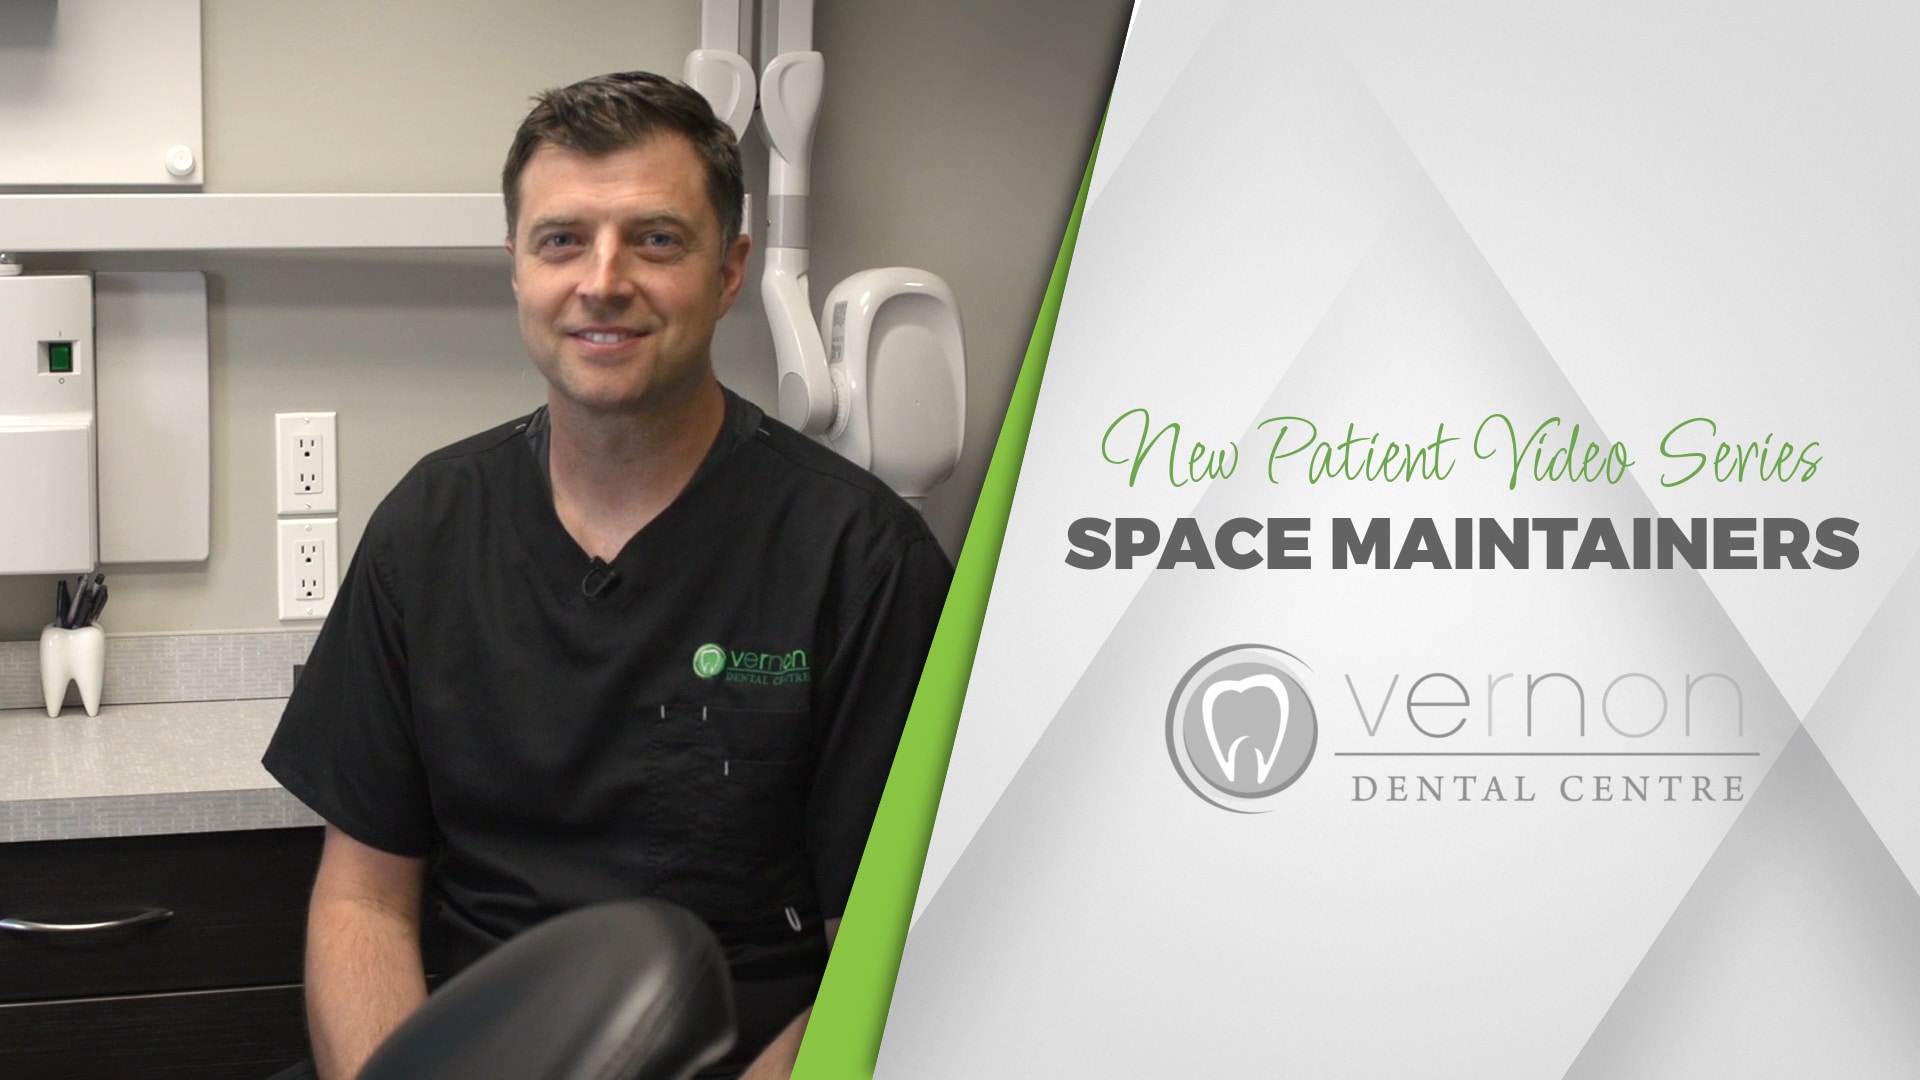 Dr. Anthony Berdan from the Vernon Dental Centre discusses baby teeth and space maintainers